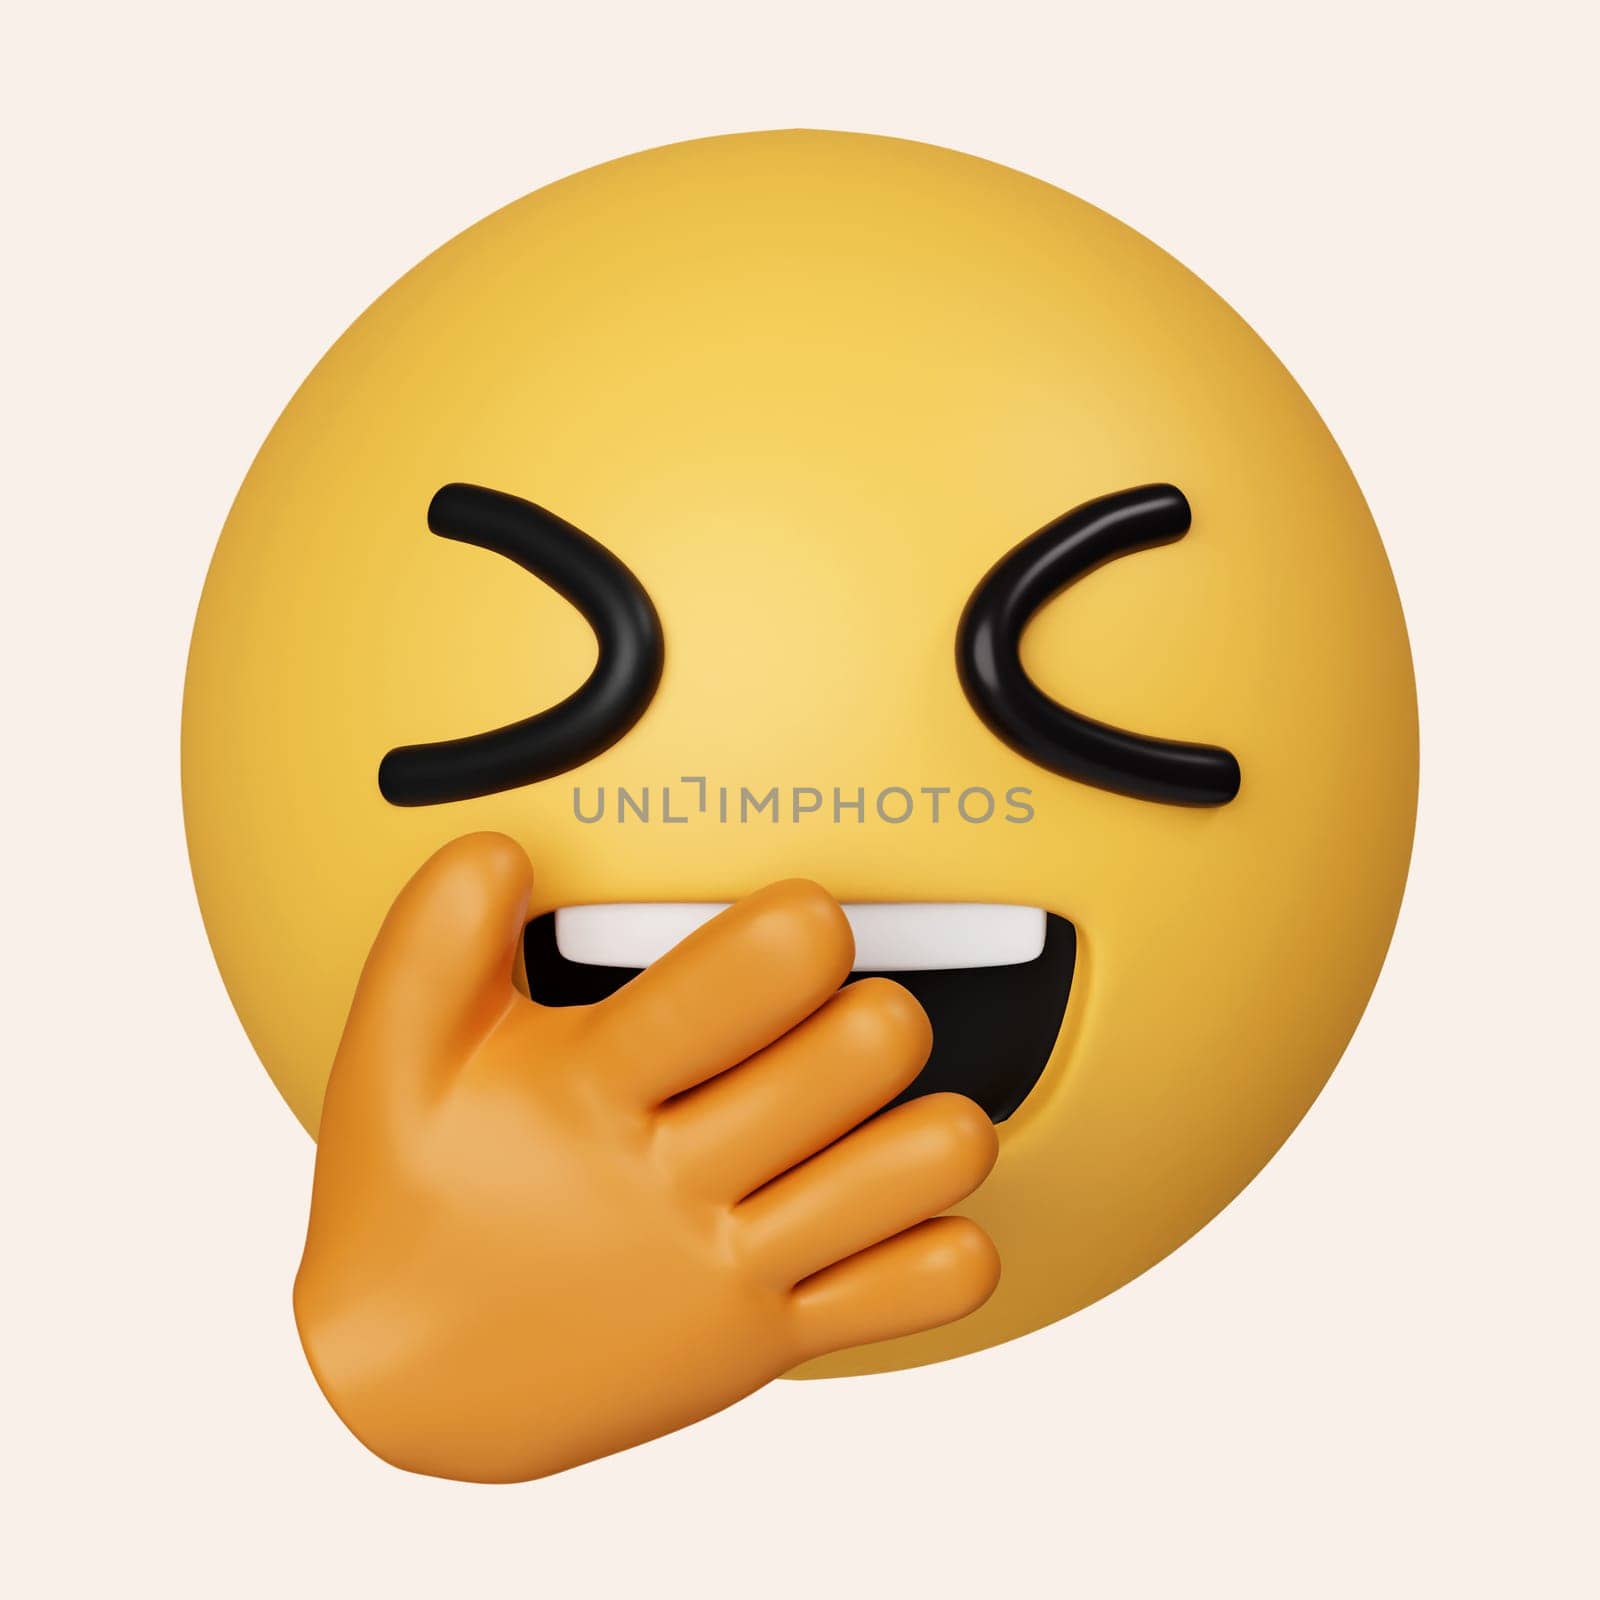 3d Chuckle Emoji. Emoticon cover mouth with hand while laughing. icon isolated on gray background. 3d rendering illustration. Clipping path..